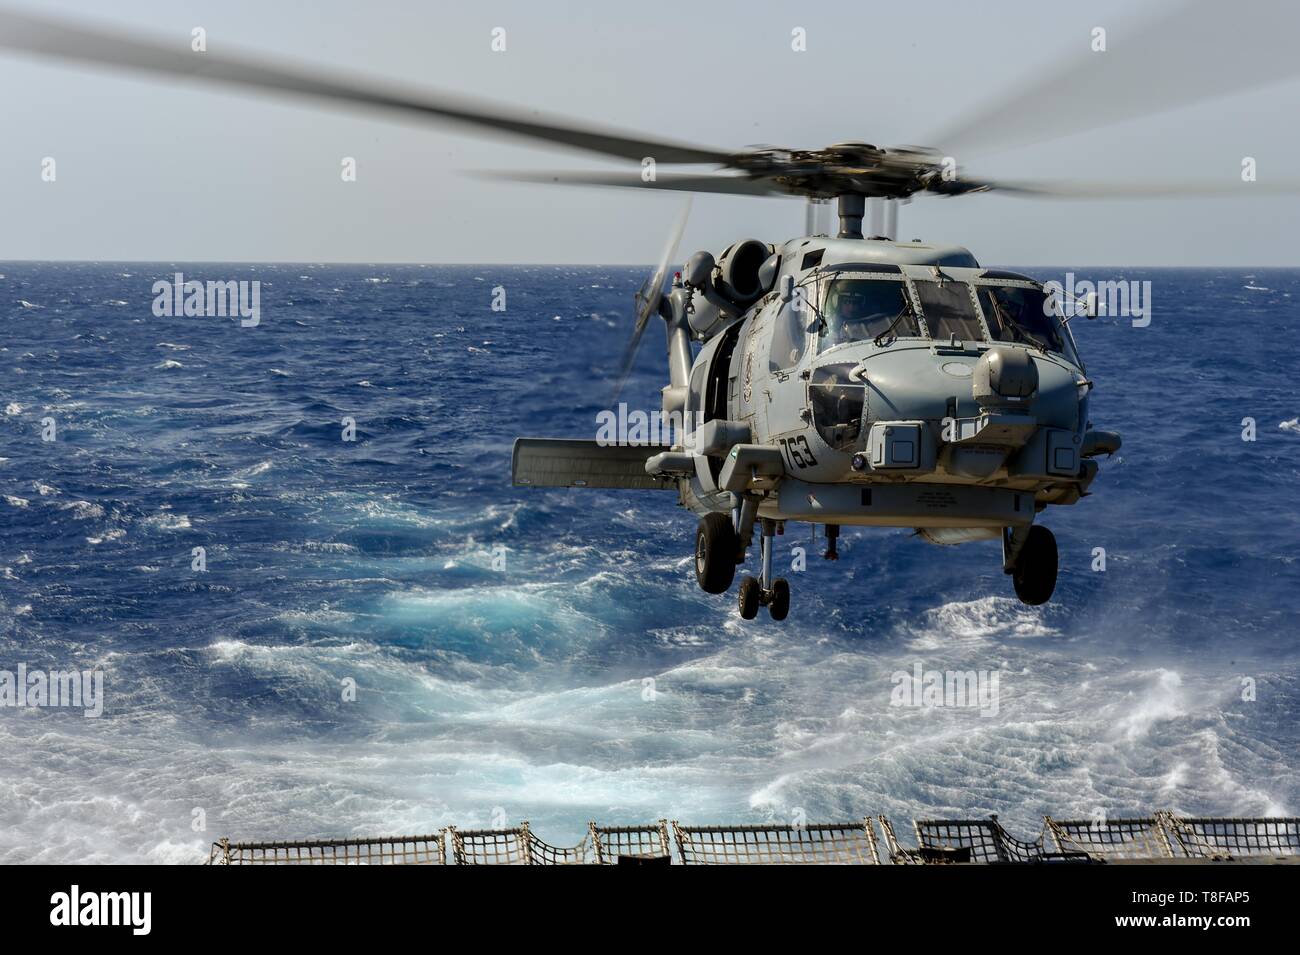 190509-N-UM706-0063 RED SEA (May 9, 2019) An MH-60R Sea Hawk Helicopter assigned to the “Grandmasters” of Helicopter Maritime Strike Squadron 46 aboard the Arleigh Burke-class guided-missile destroyer USS Nitze (DDG 94) takes off from the ship’s flight deck. Nitze is underway as part of Abraham Lincoln Carrier Strike Group (ABECSG), which is deployed to the U.S. Central Command area of responsibility in order to defend American forces and interests in the region. With Abraham Lincoln as the flagship, deployed strike group assets include staffs, ships and aircraft of Carrier Strike Group 12, De Stock Photo